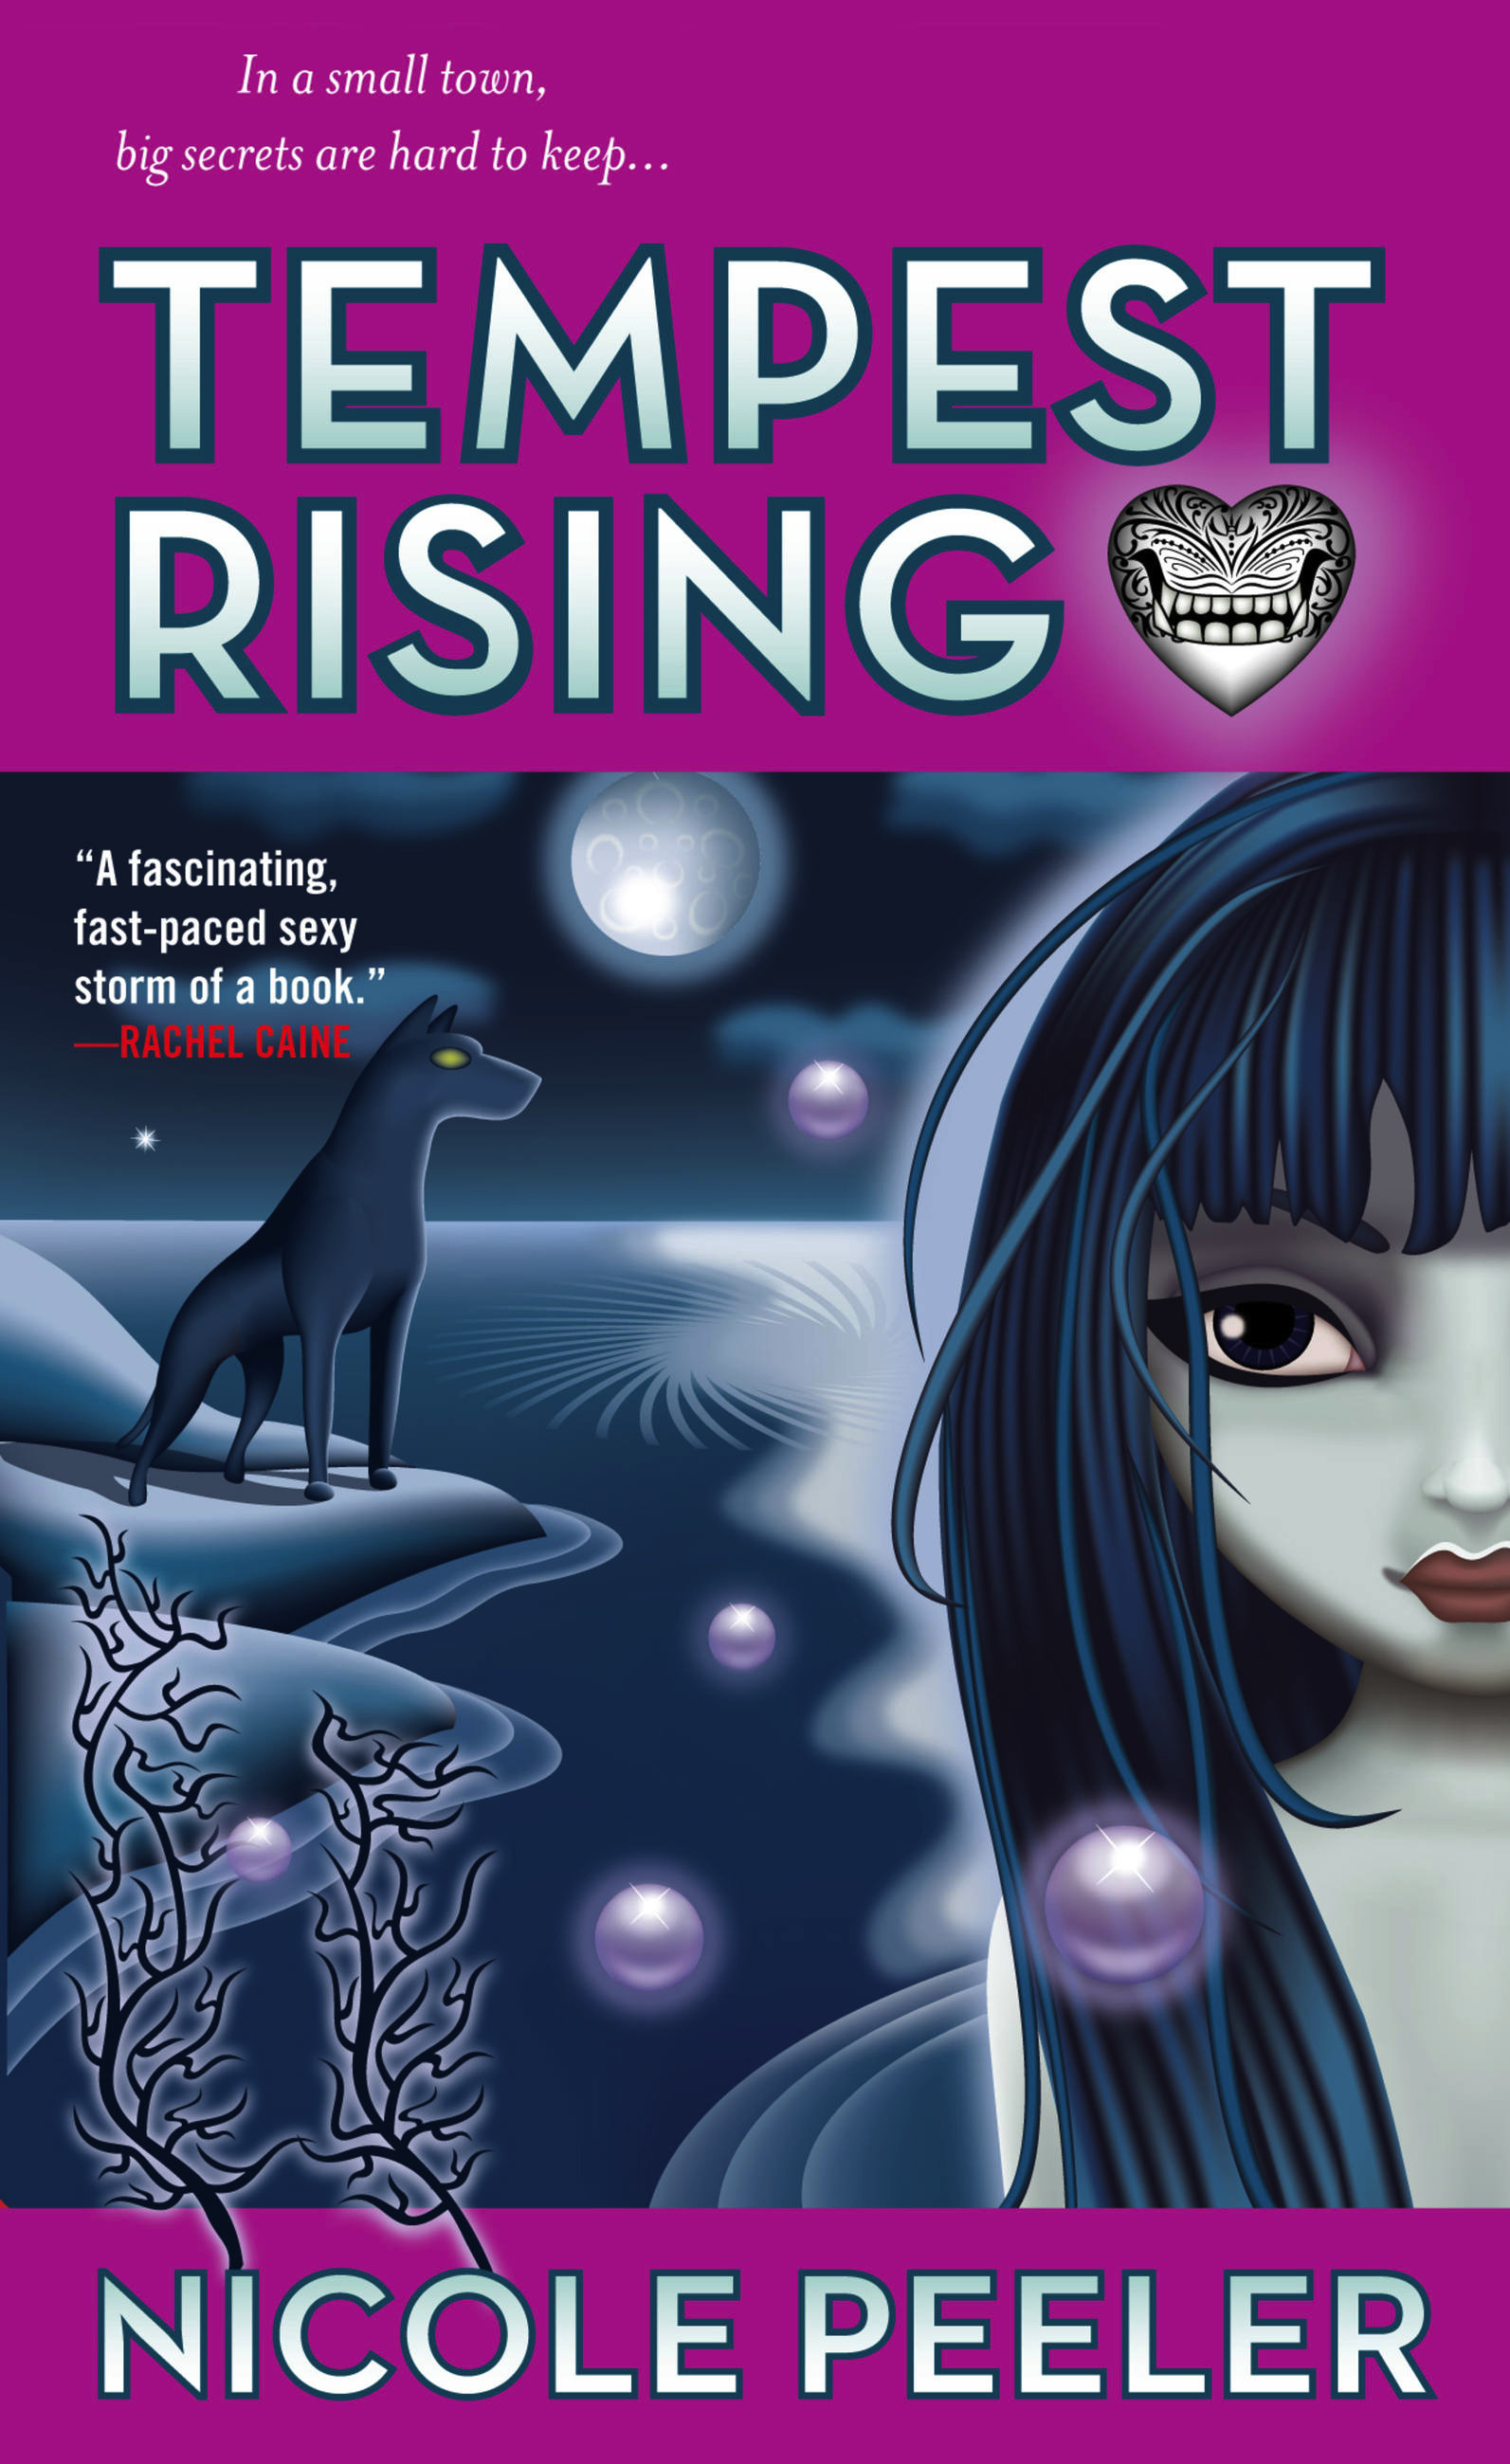 Tempest Rising by Nicole Peeler | Hachette Book Group